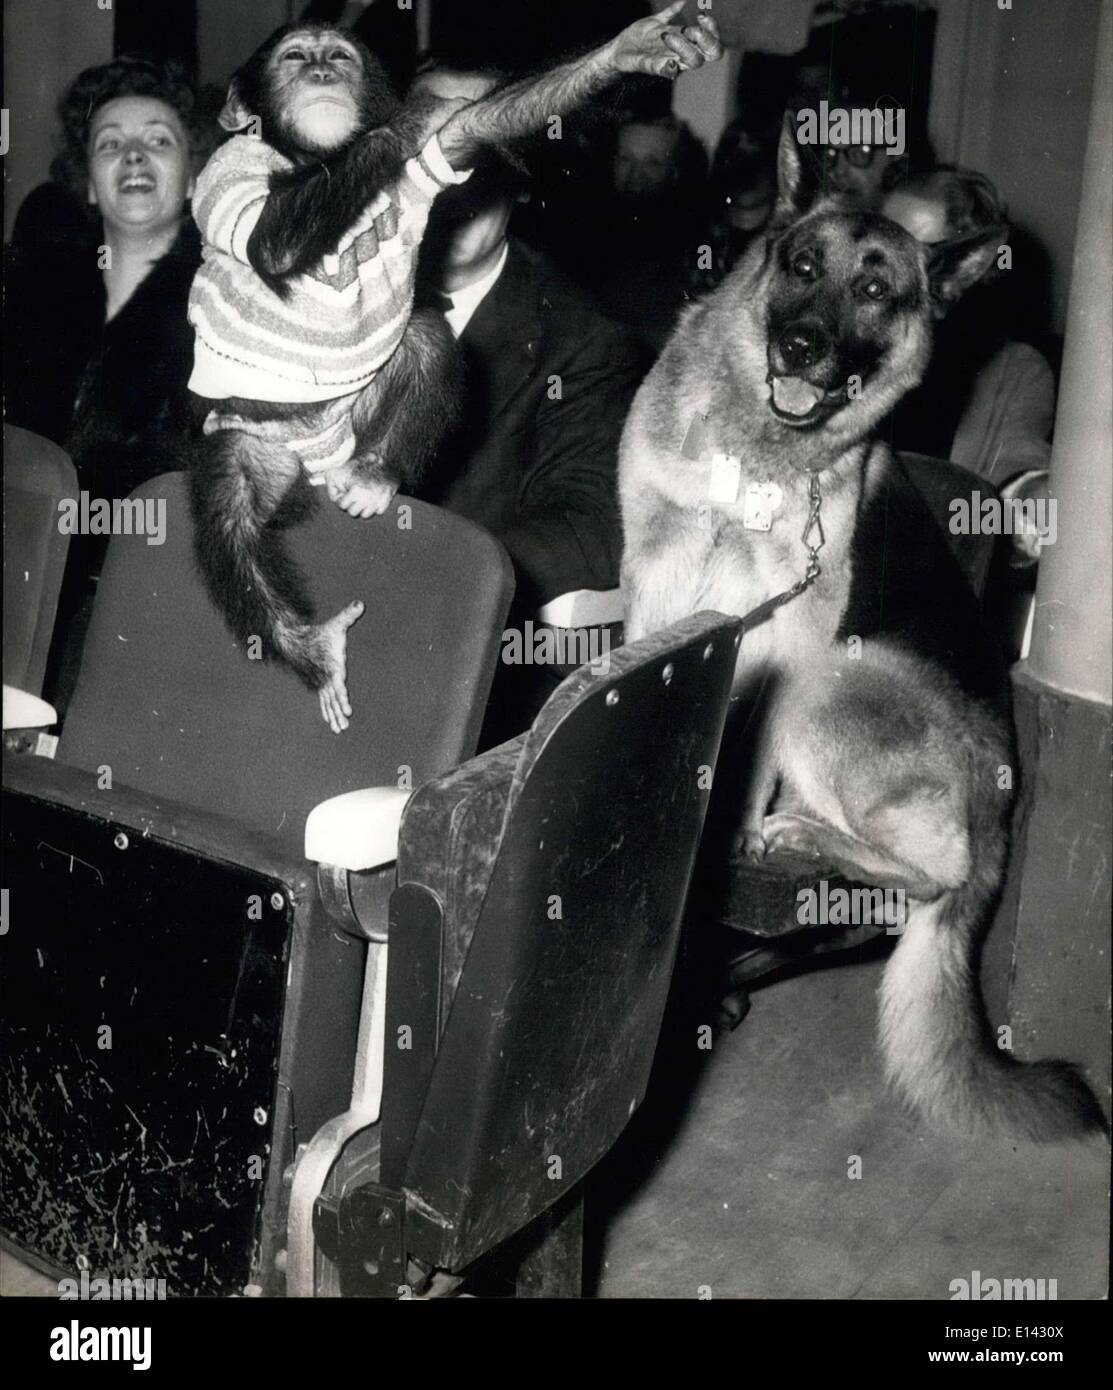 Mar. 31, 2012 - Take your pets to the show. A special show organized under the sponsorship of Friend of the Animals society was held in a Paris cinema last night. Only spectators who were accompanied by their pets were admitted. OPS: An amusing shot taken during the interval showing a monkey and a dog among the spectators. Dec. 5th/56 Stock Photo